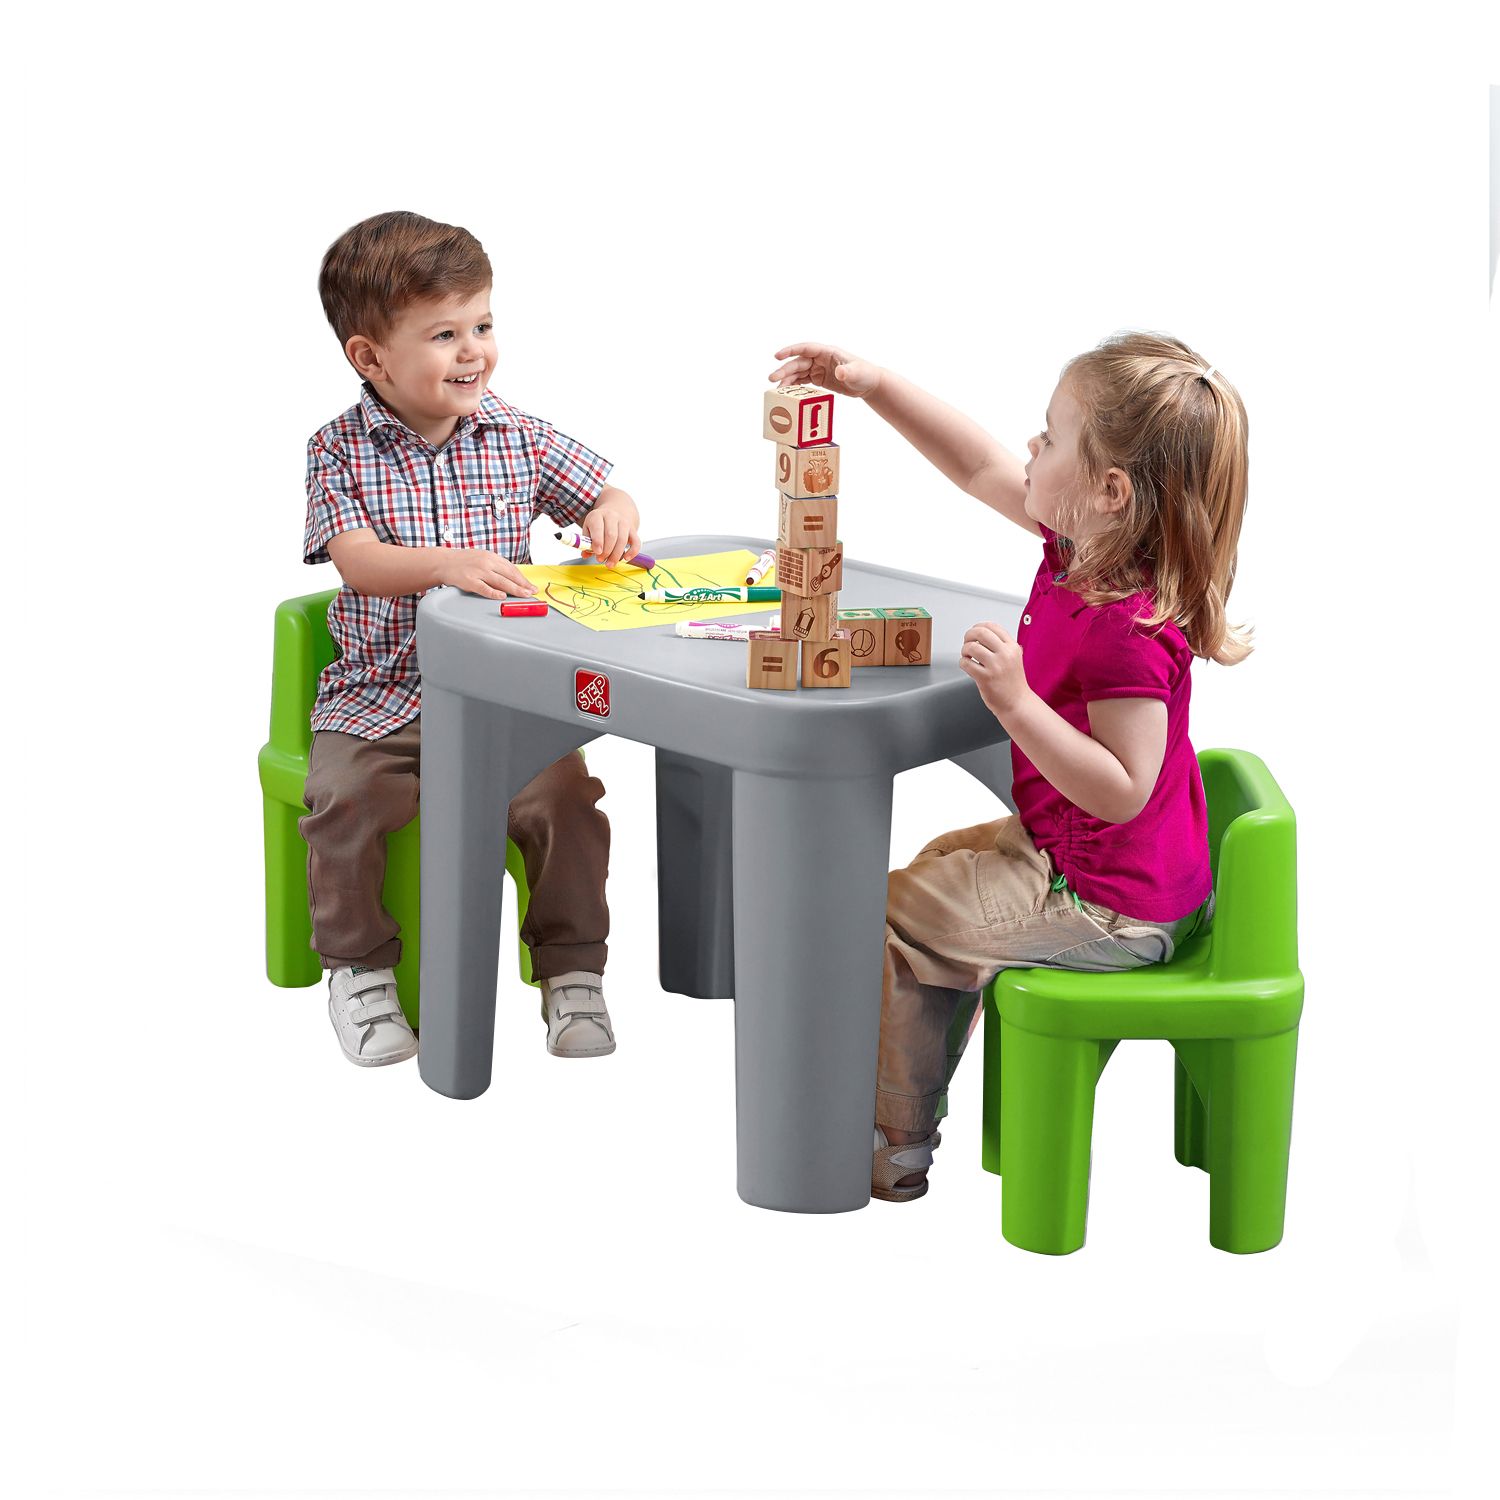 childrens table and chairs at kohl's